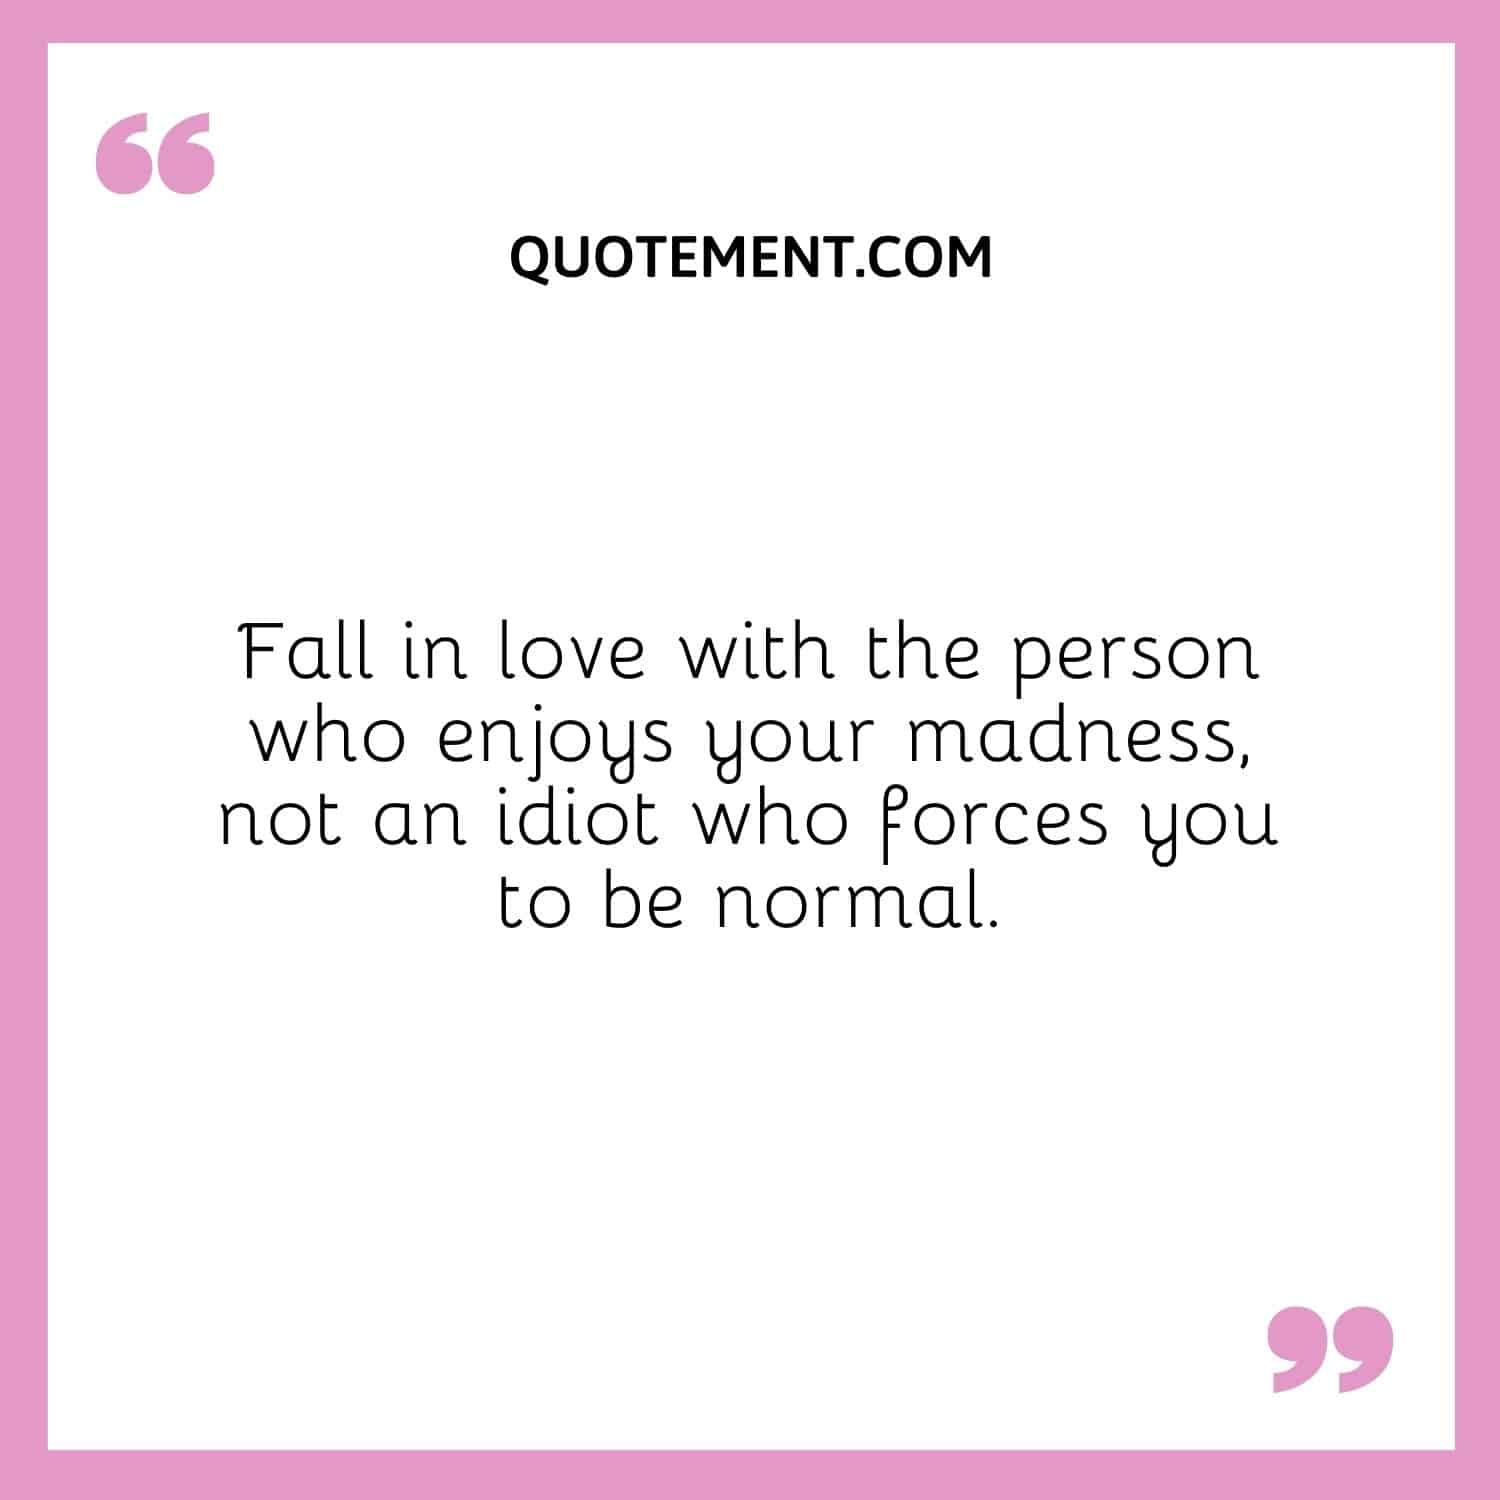 Fall in love with the person who enjoys your madness, not an idiot who forces you to be normal.